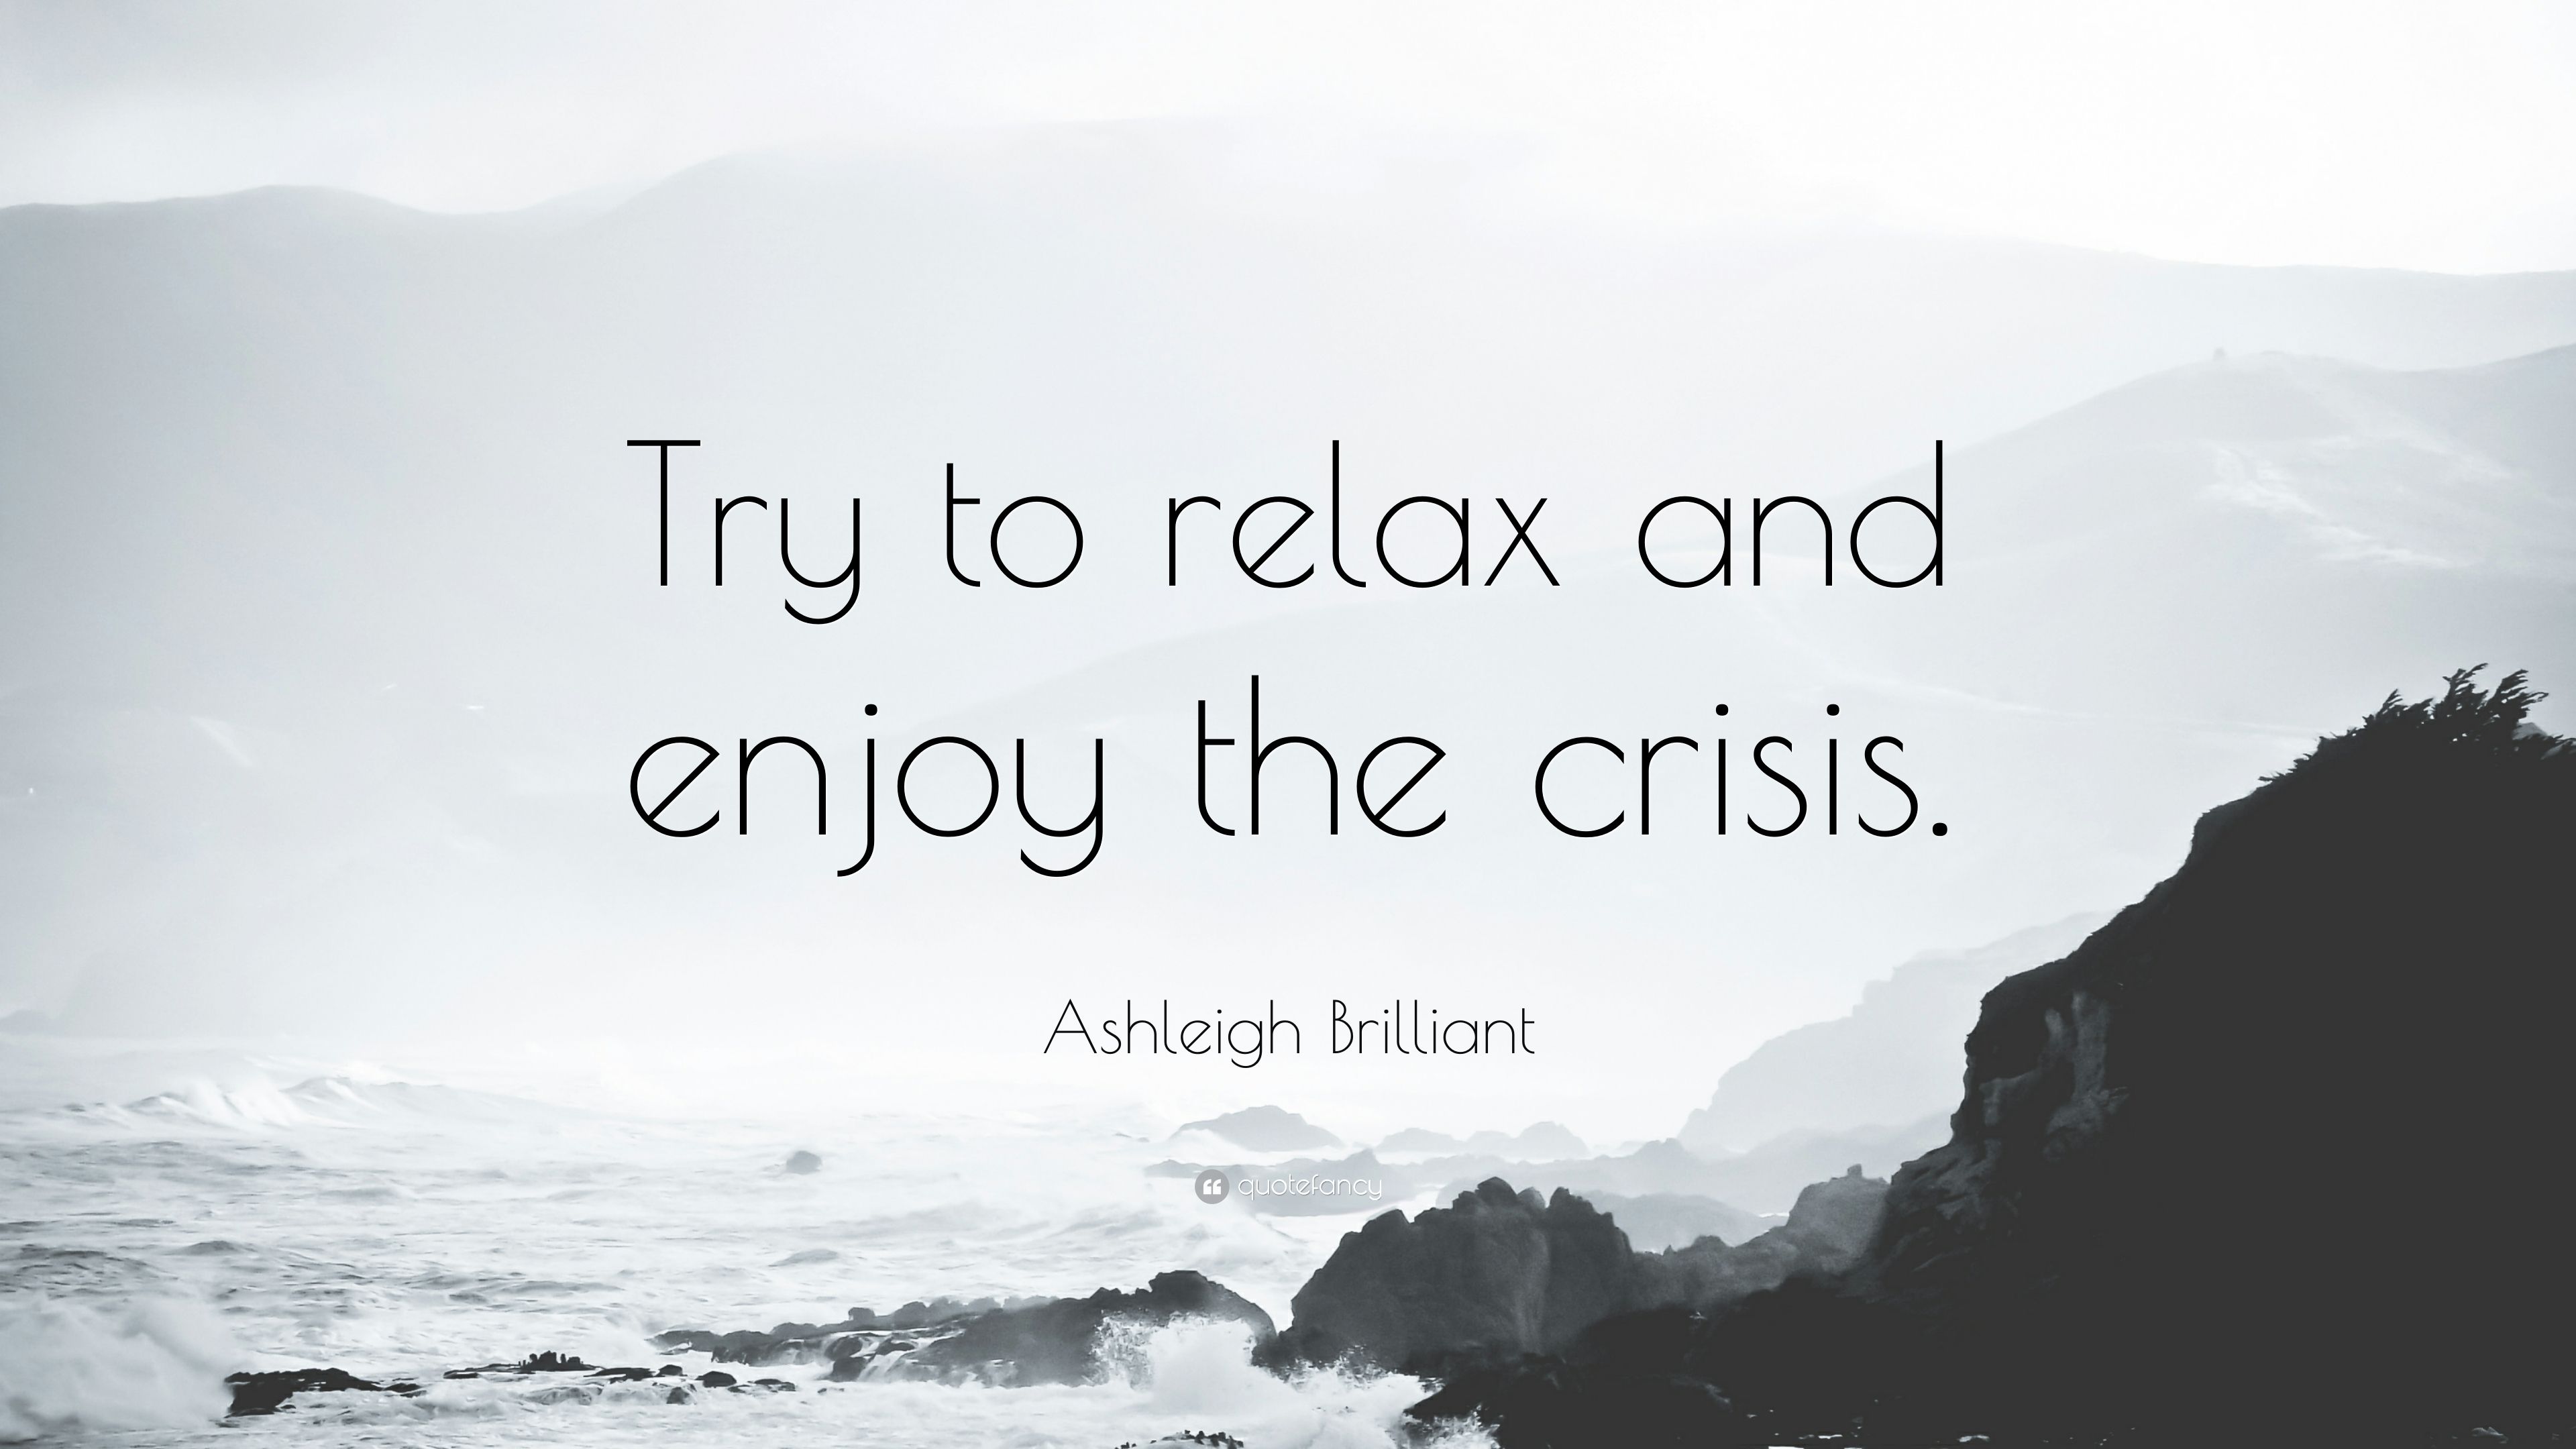 Ashleigh Brilliant Quote: “Try to relax and enjoy the crisis.” 9